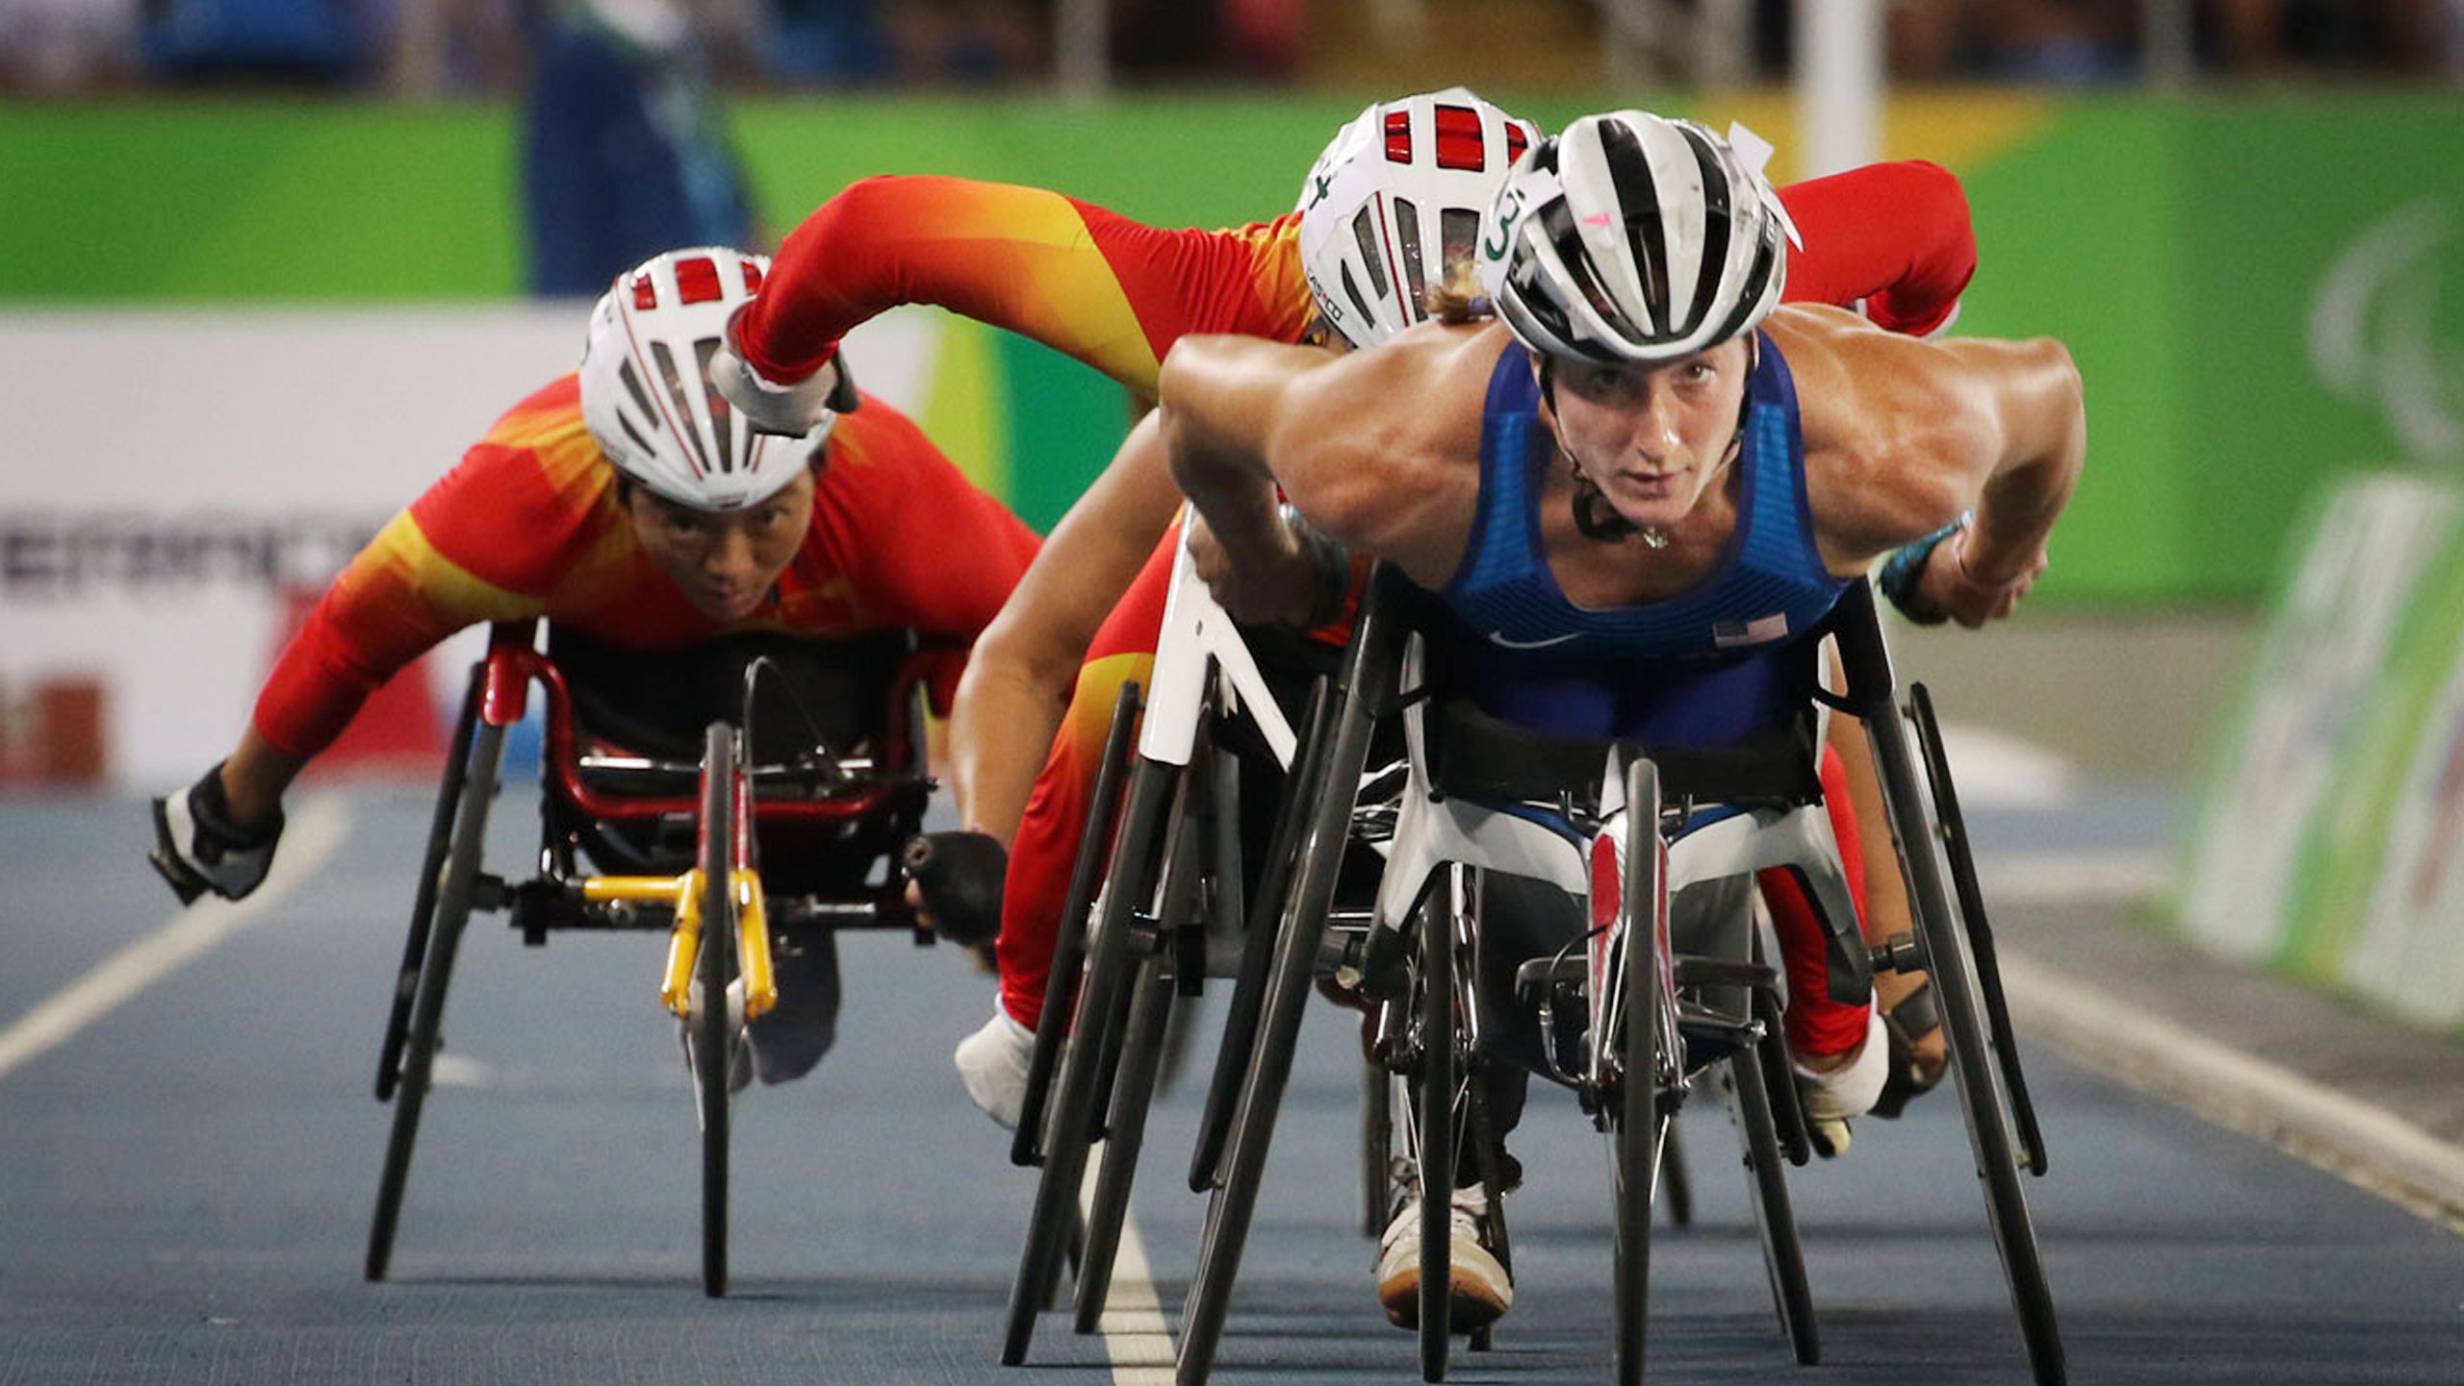 Tatyana McFadden is the first ever wheelchair racer to be featured in a Nike commercial